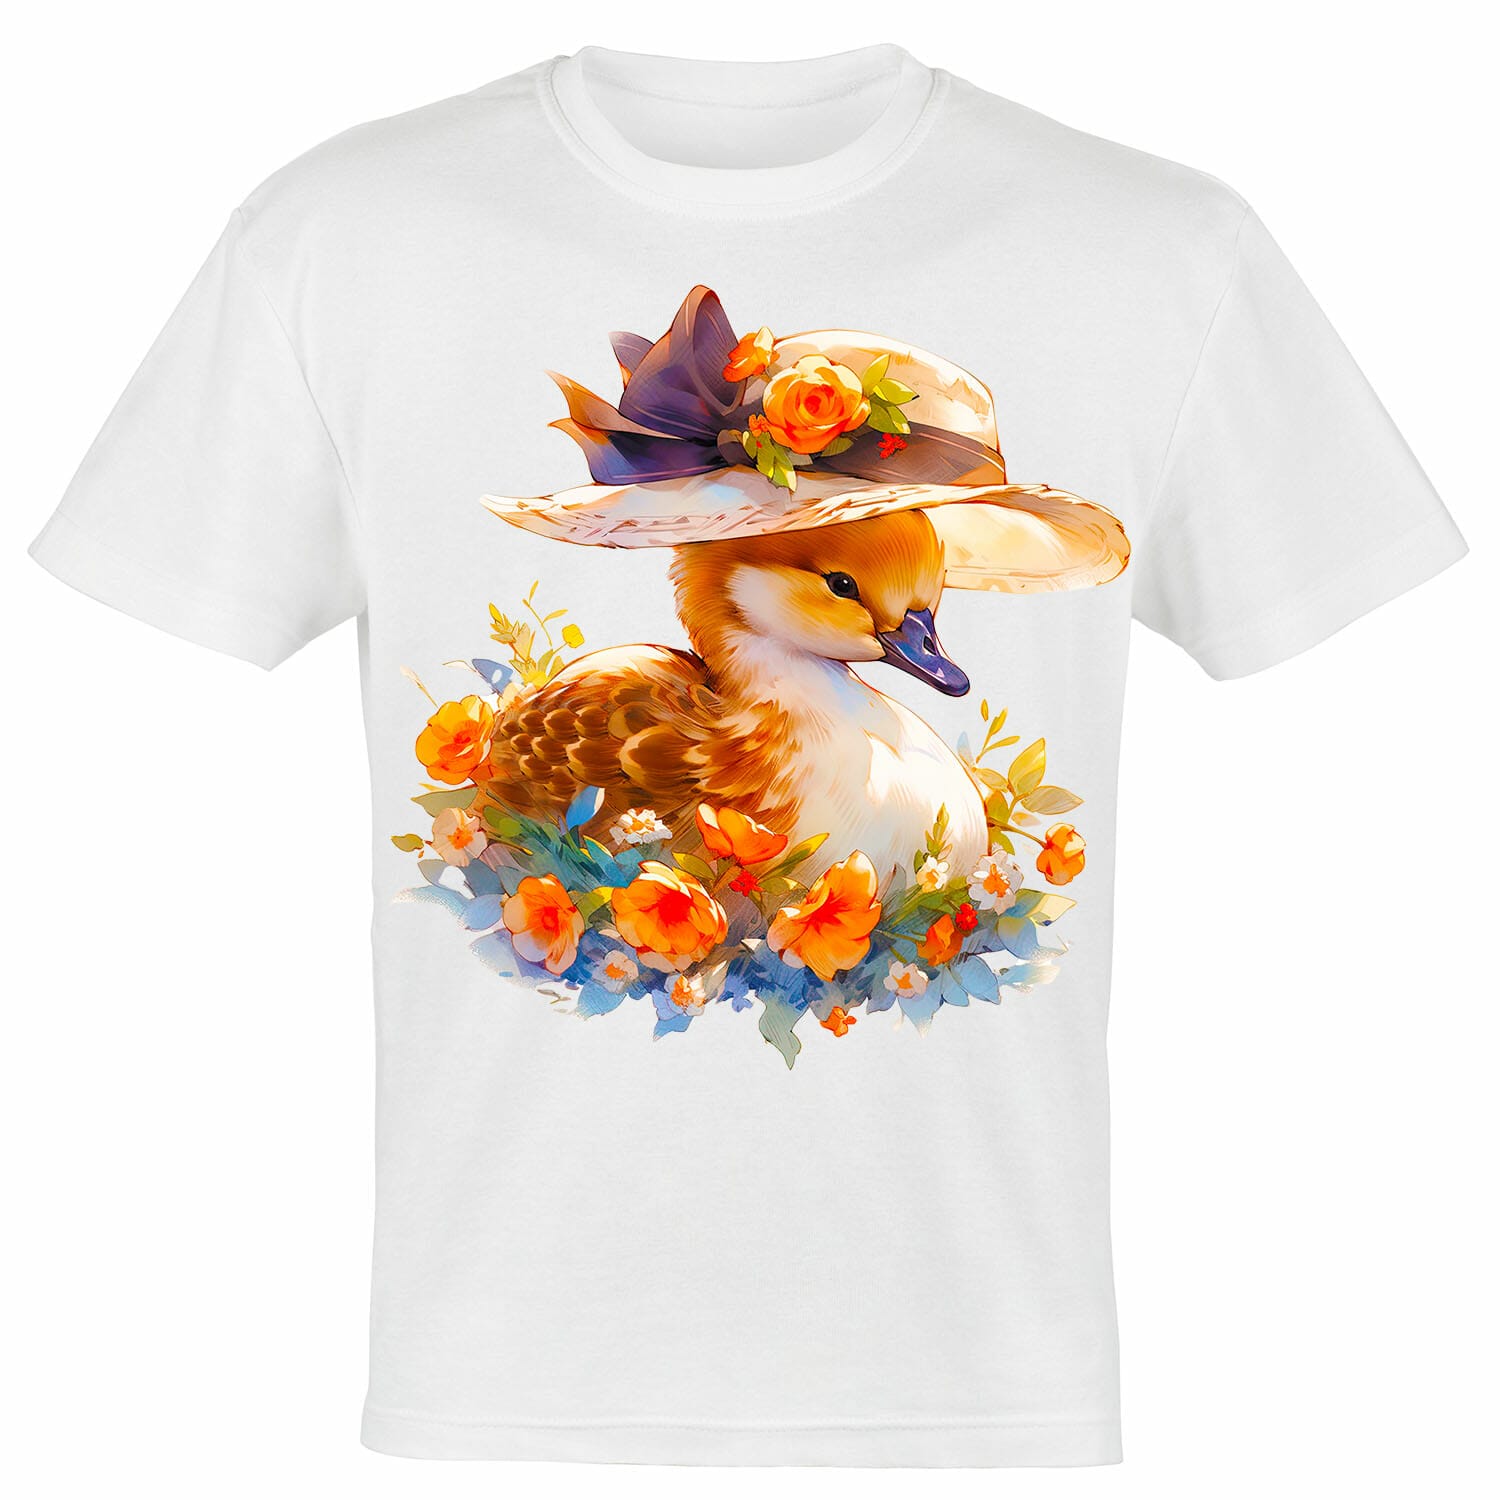 Duck with Victorian Hat and flowers tshirt design